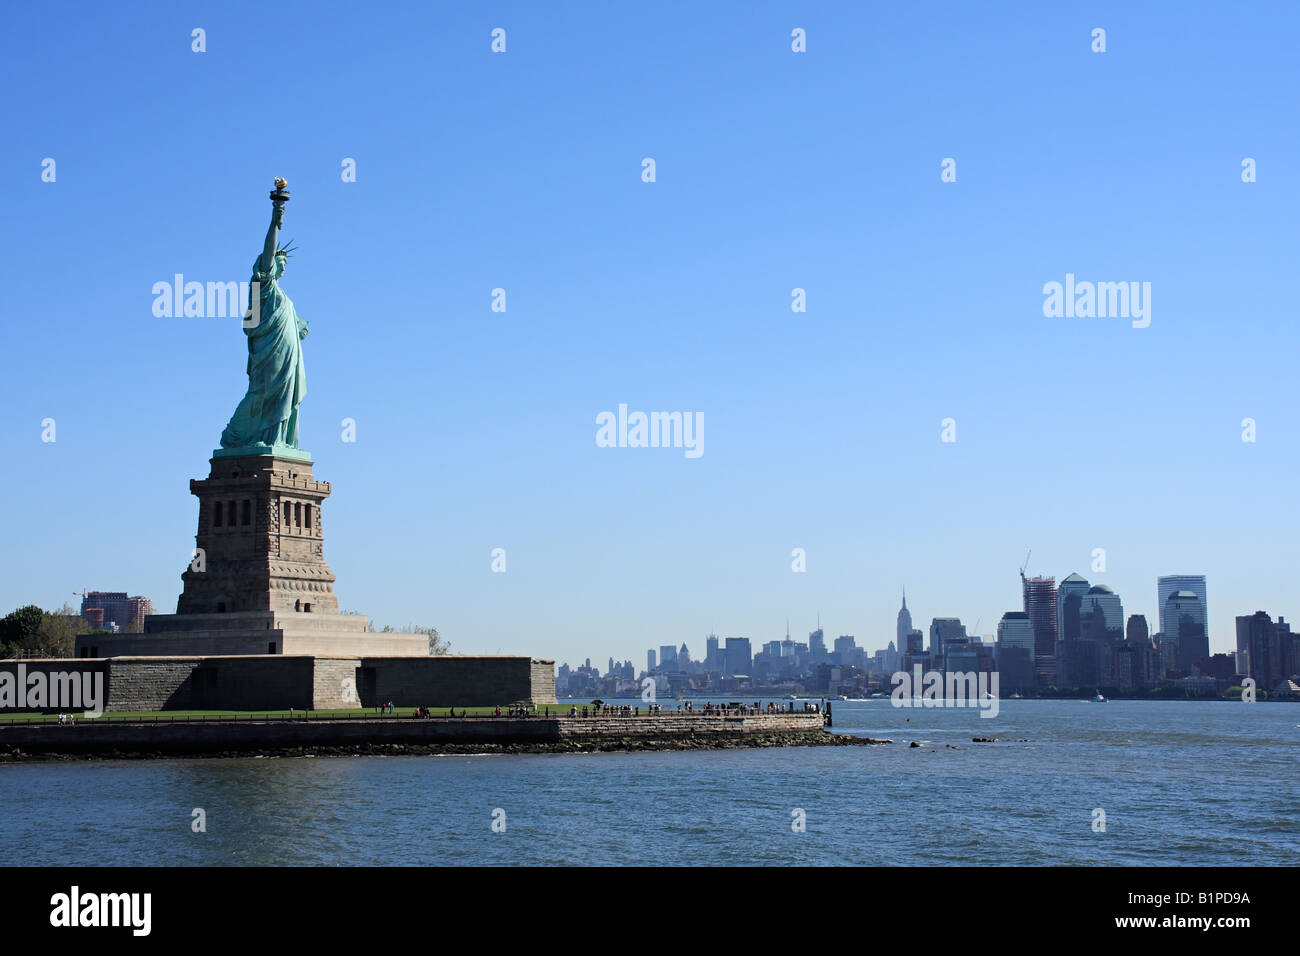 Lady Liberty on Liberty Island with Manhattan in the background - New York City, USA Stock Photo